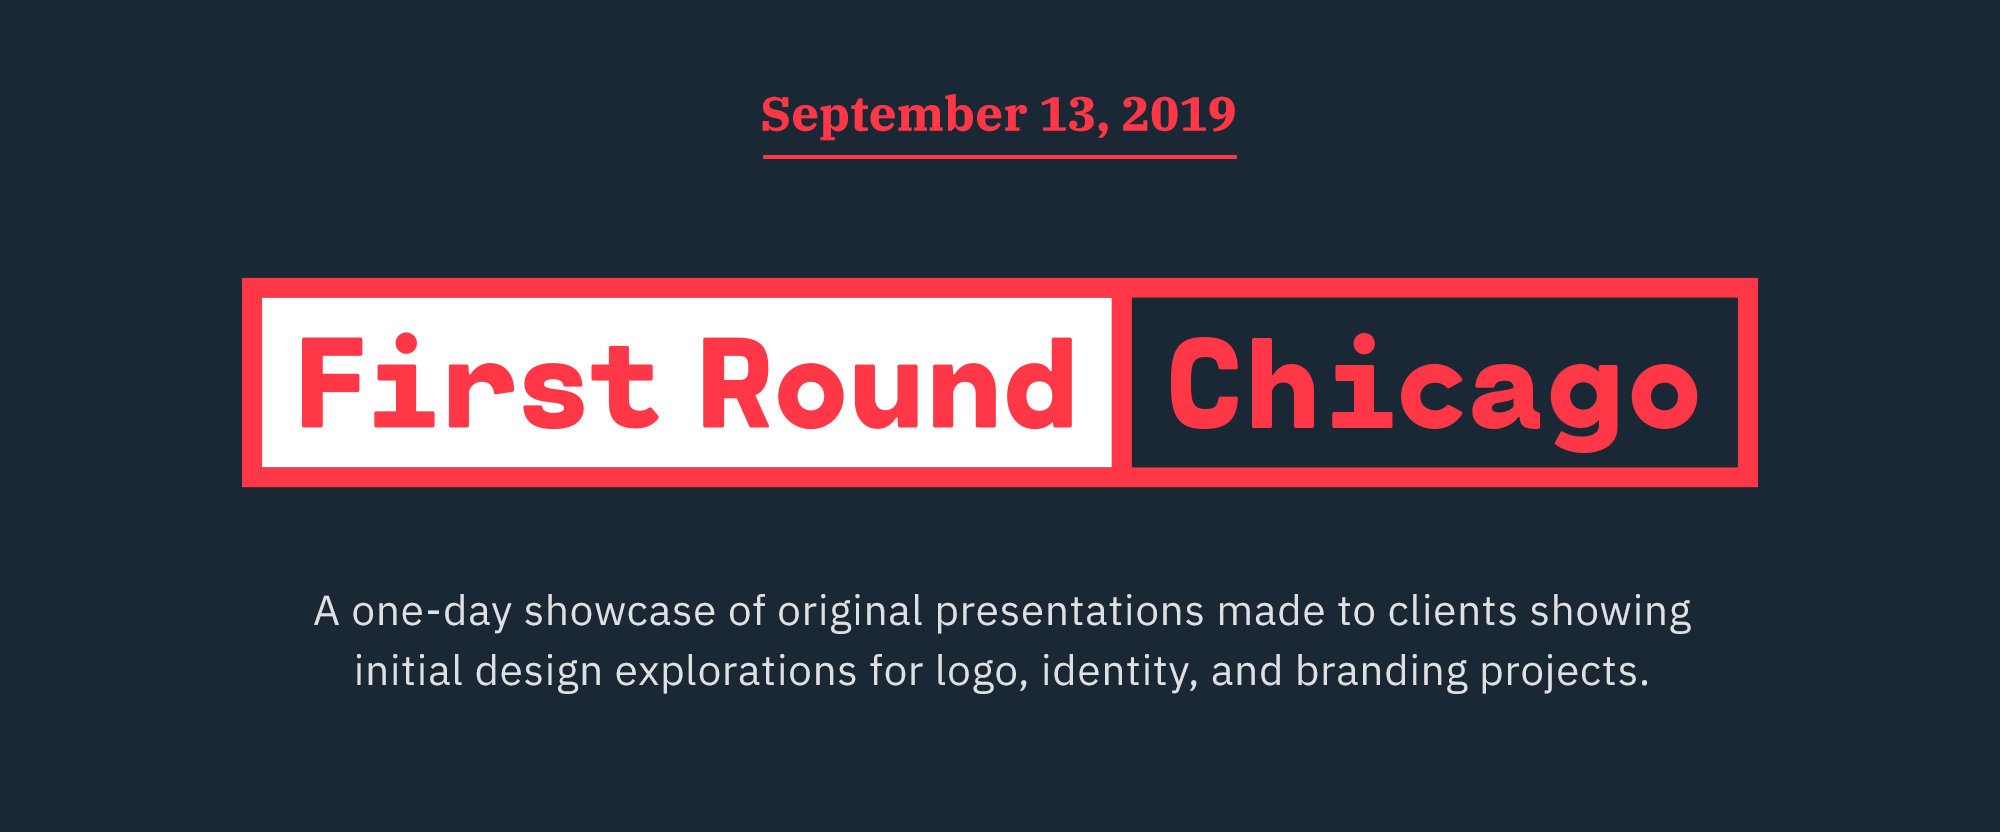 First Round 2019 - Chicago: Tickets Available